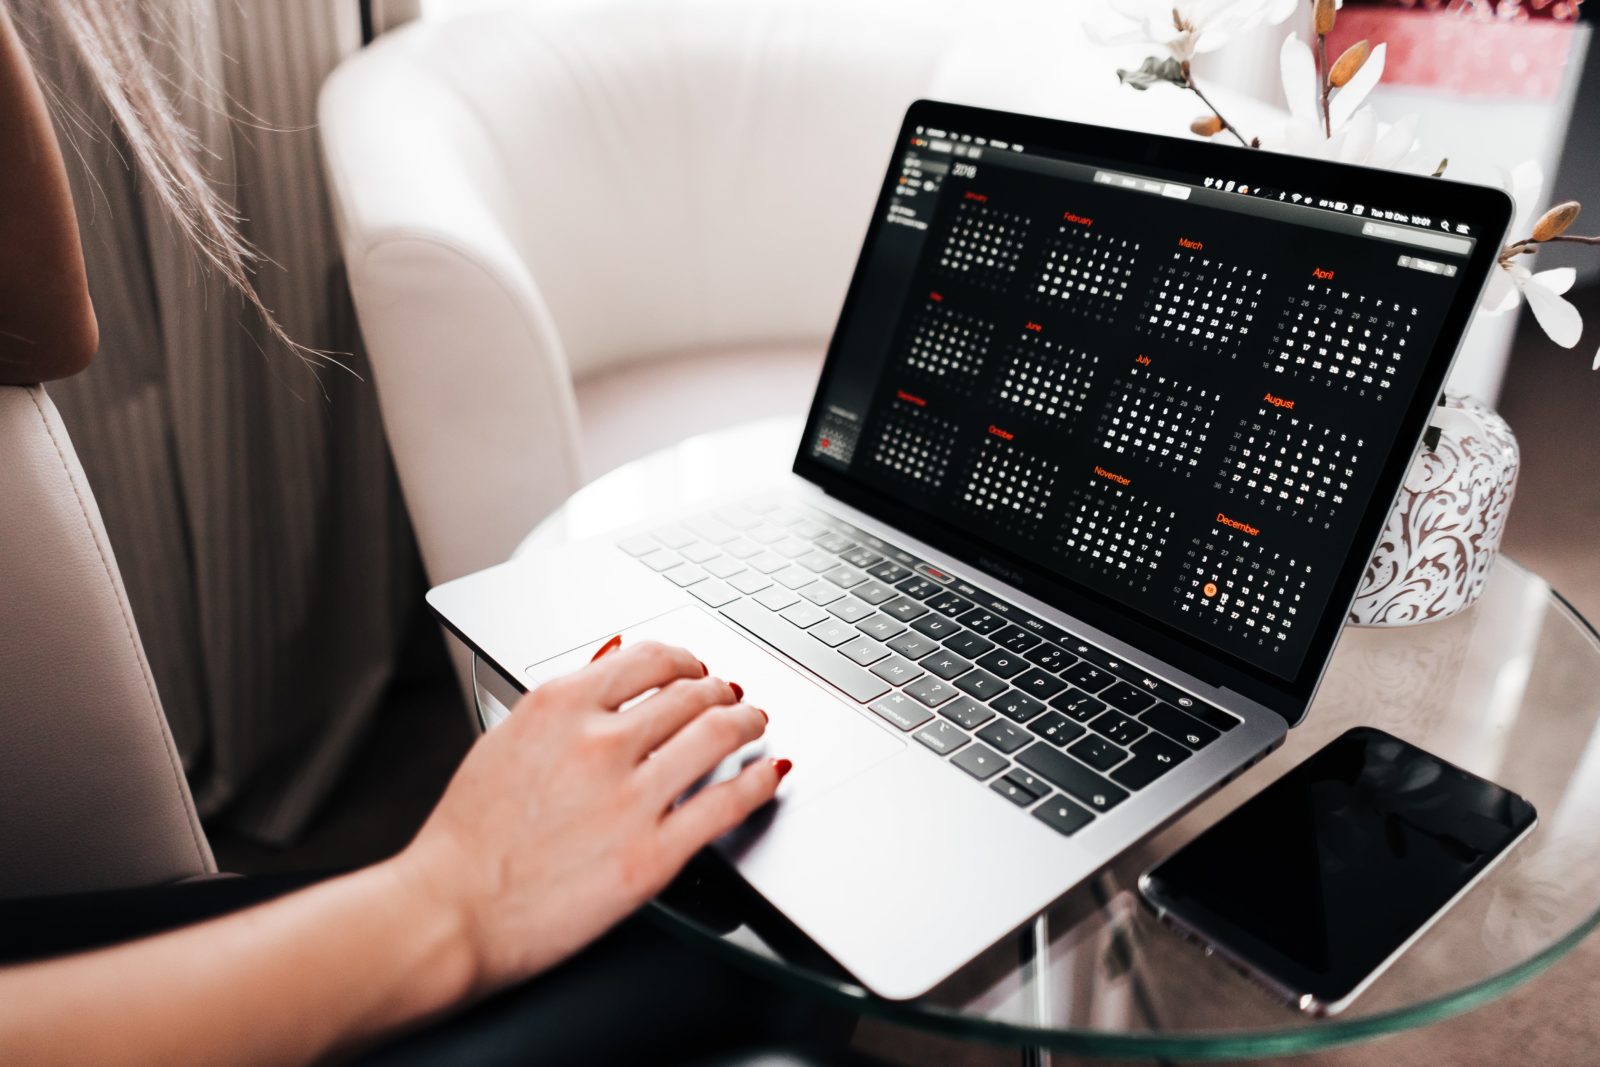 A good content calendar app will help you manage your channels and communicate consistently. A woman is working on a laptop, which displays a calendar